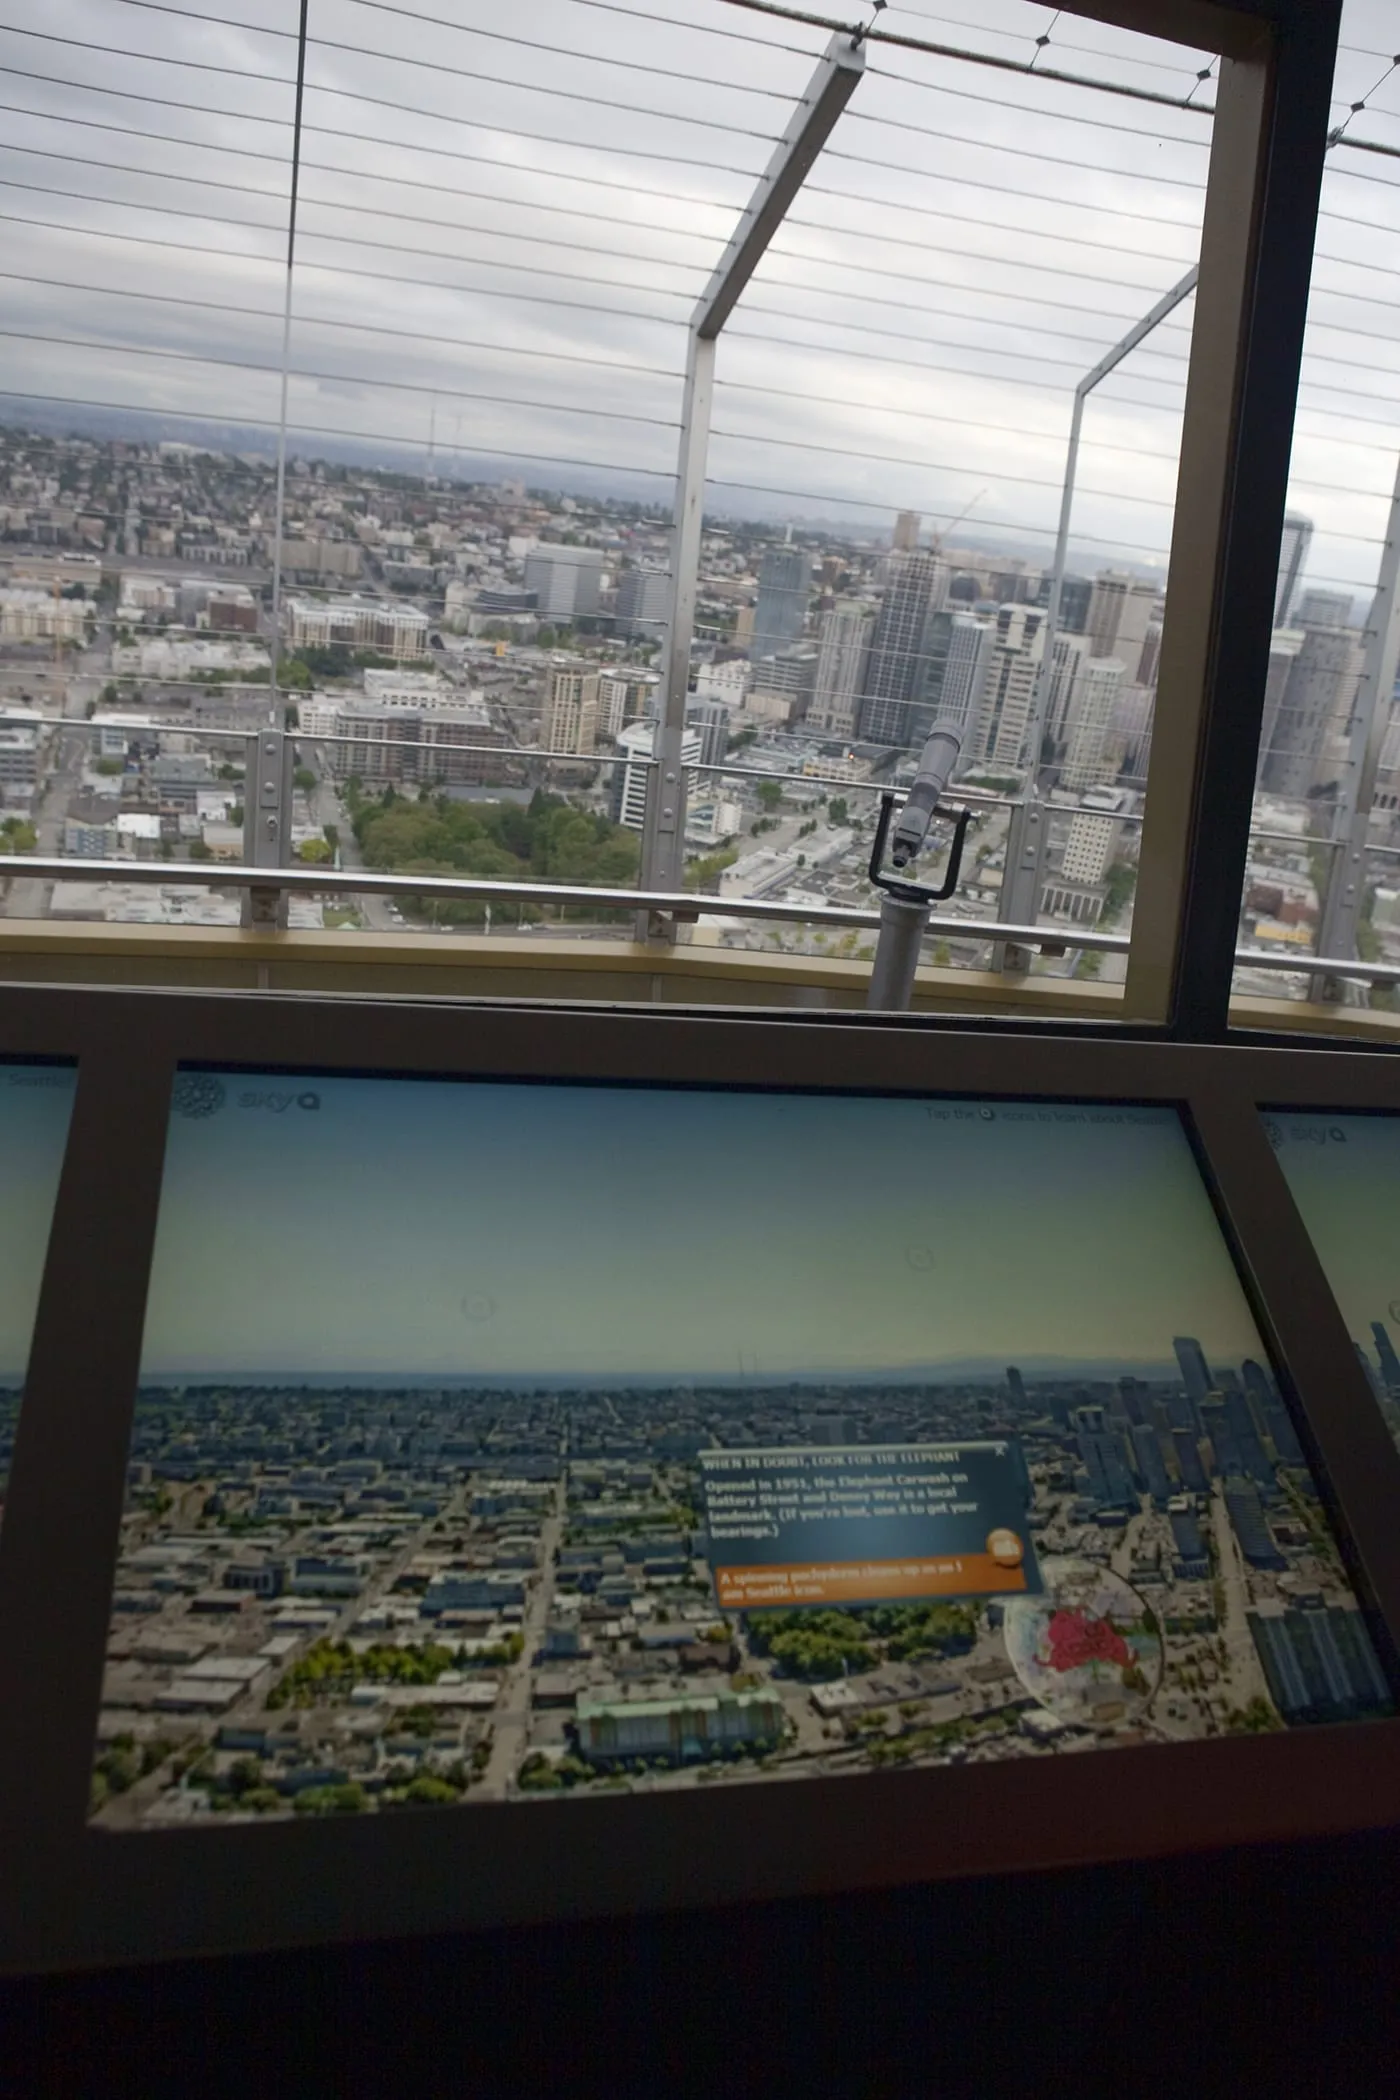 View from the inside the Space Needle in Seattle, Washington.